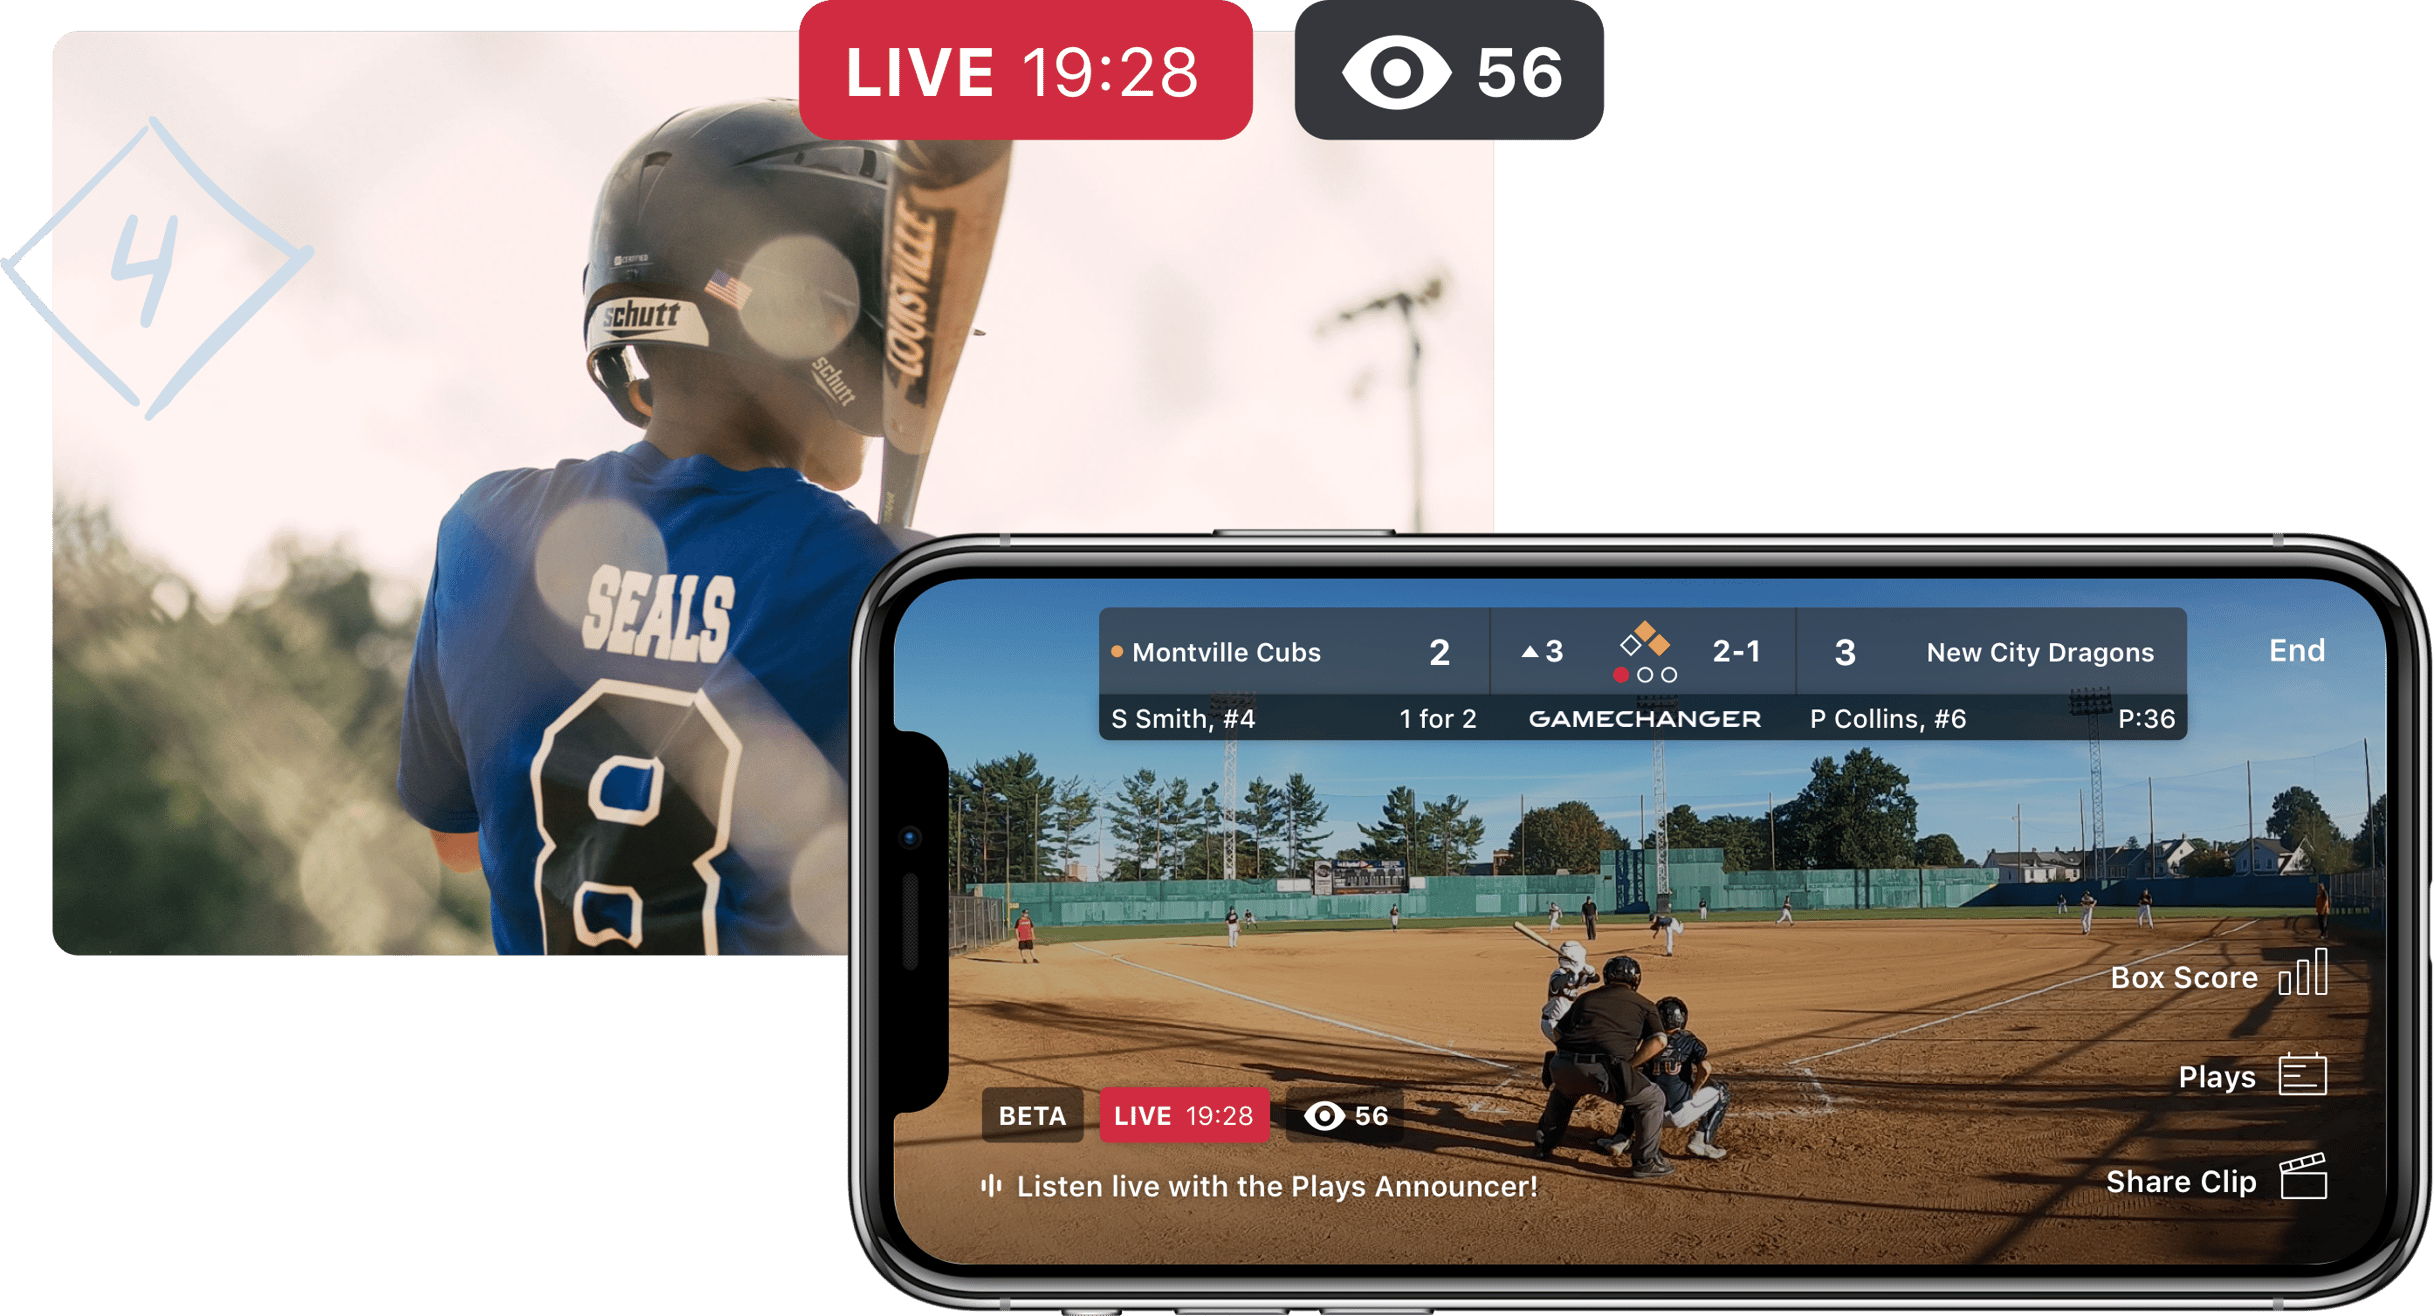 The-Mobile-Tech-Powering-Youth-Sports-Streaming 